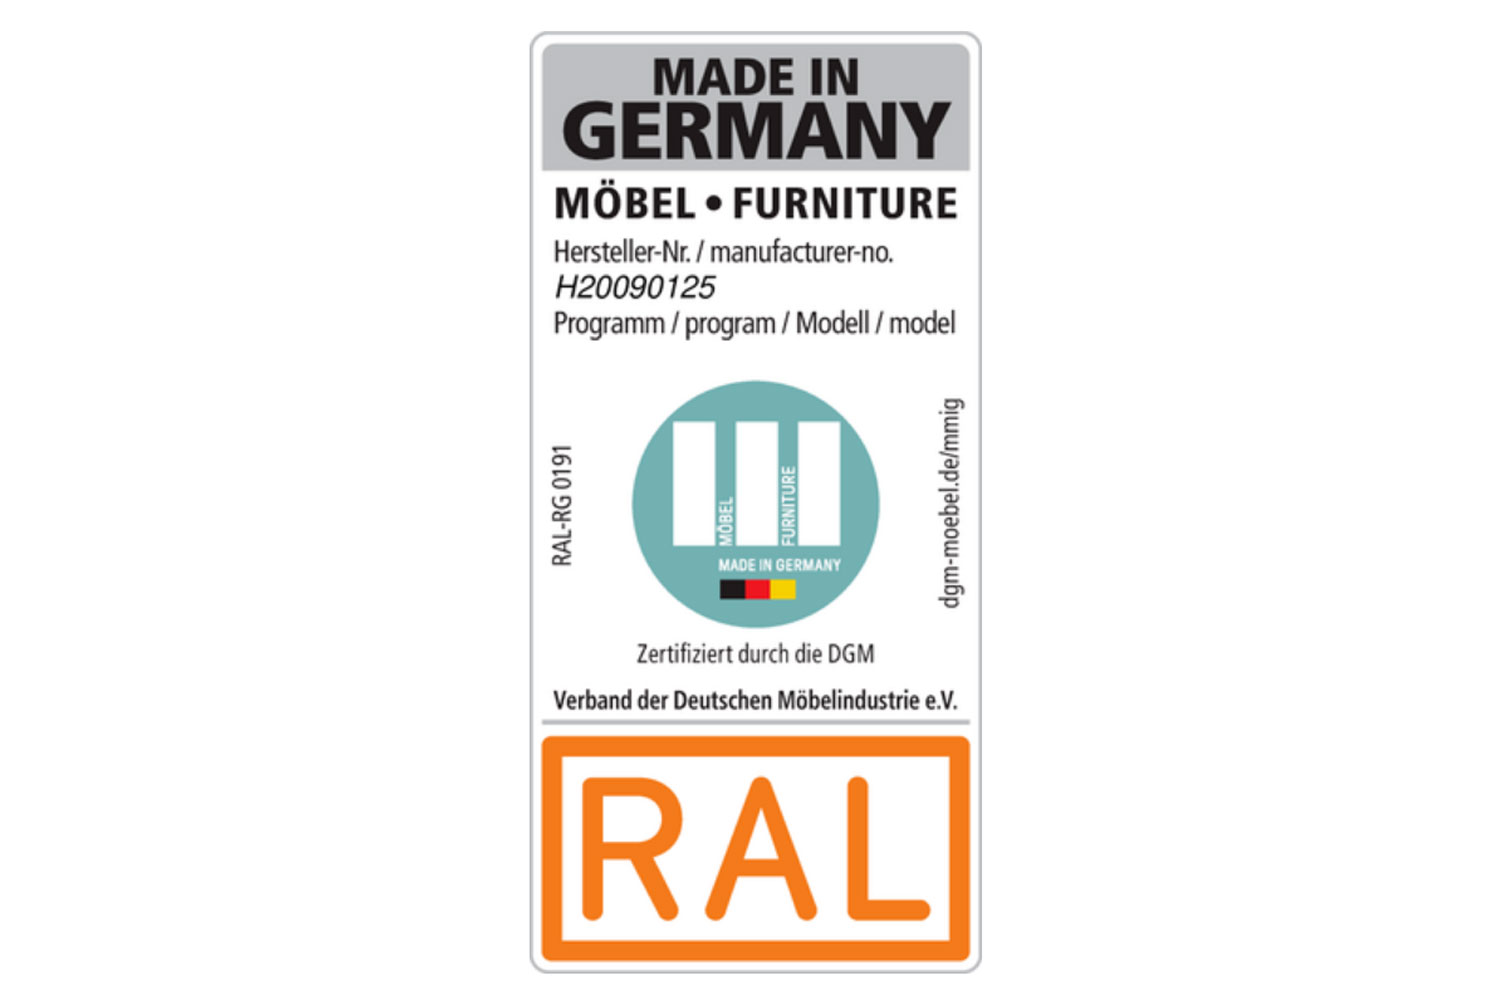 RAL made in Germany